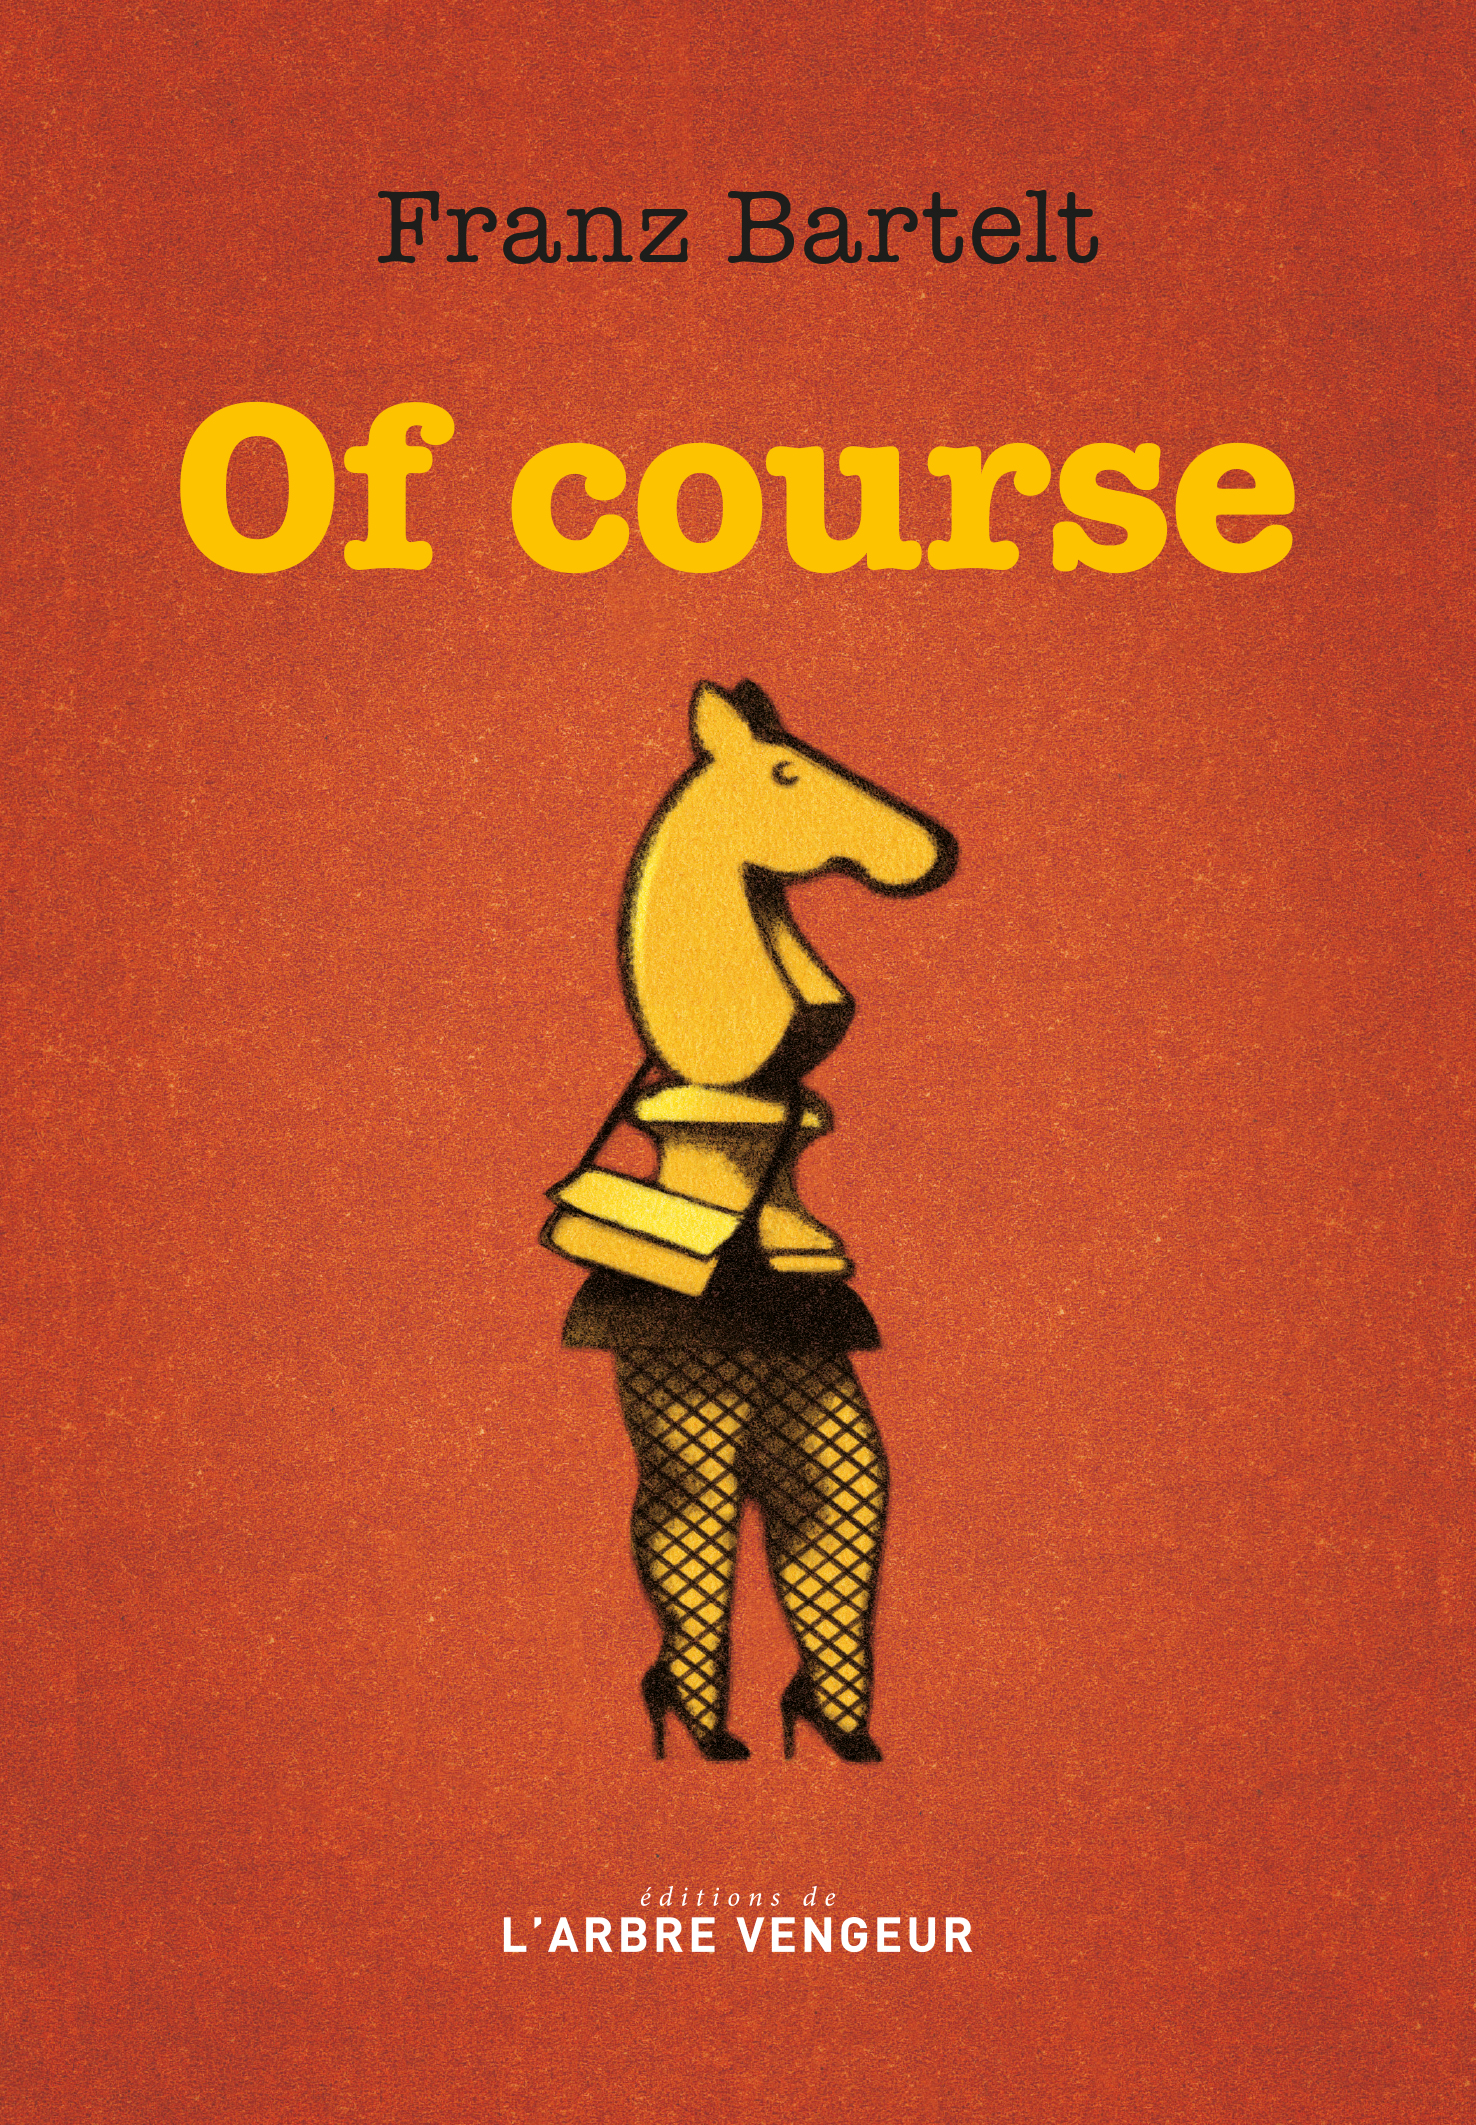 Afficher "Of course"